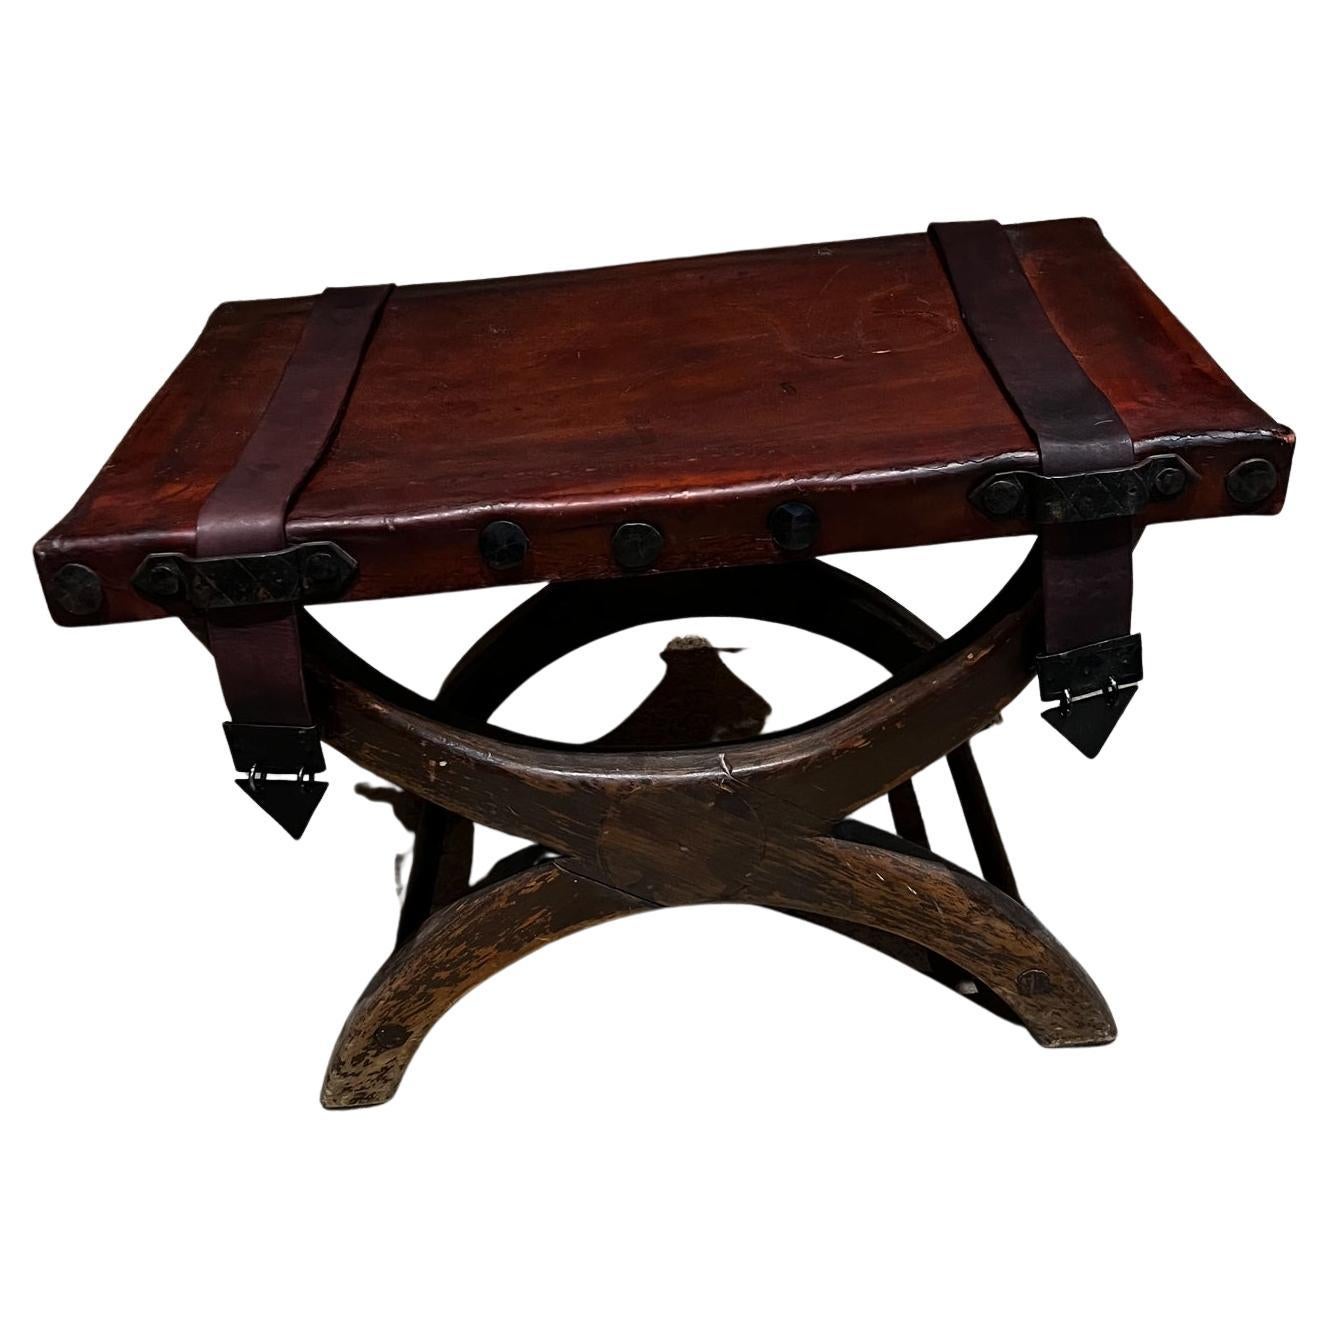 1940s Spanish Colonial Curule Miguelito Medallion Stool Leather and Mahogany For Sale